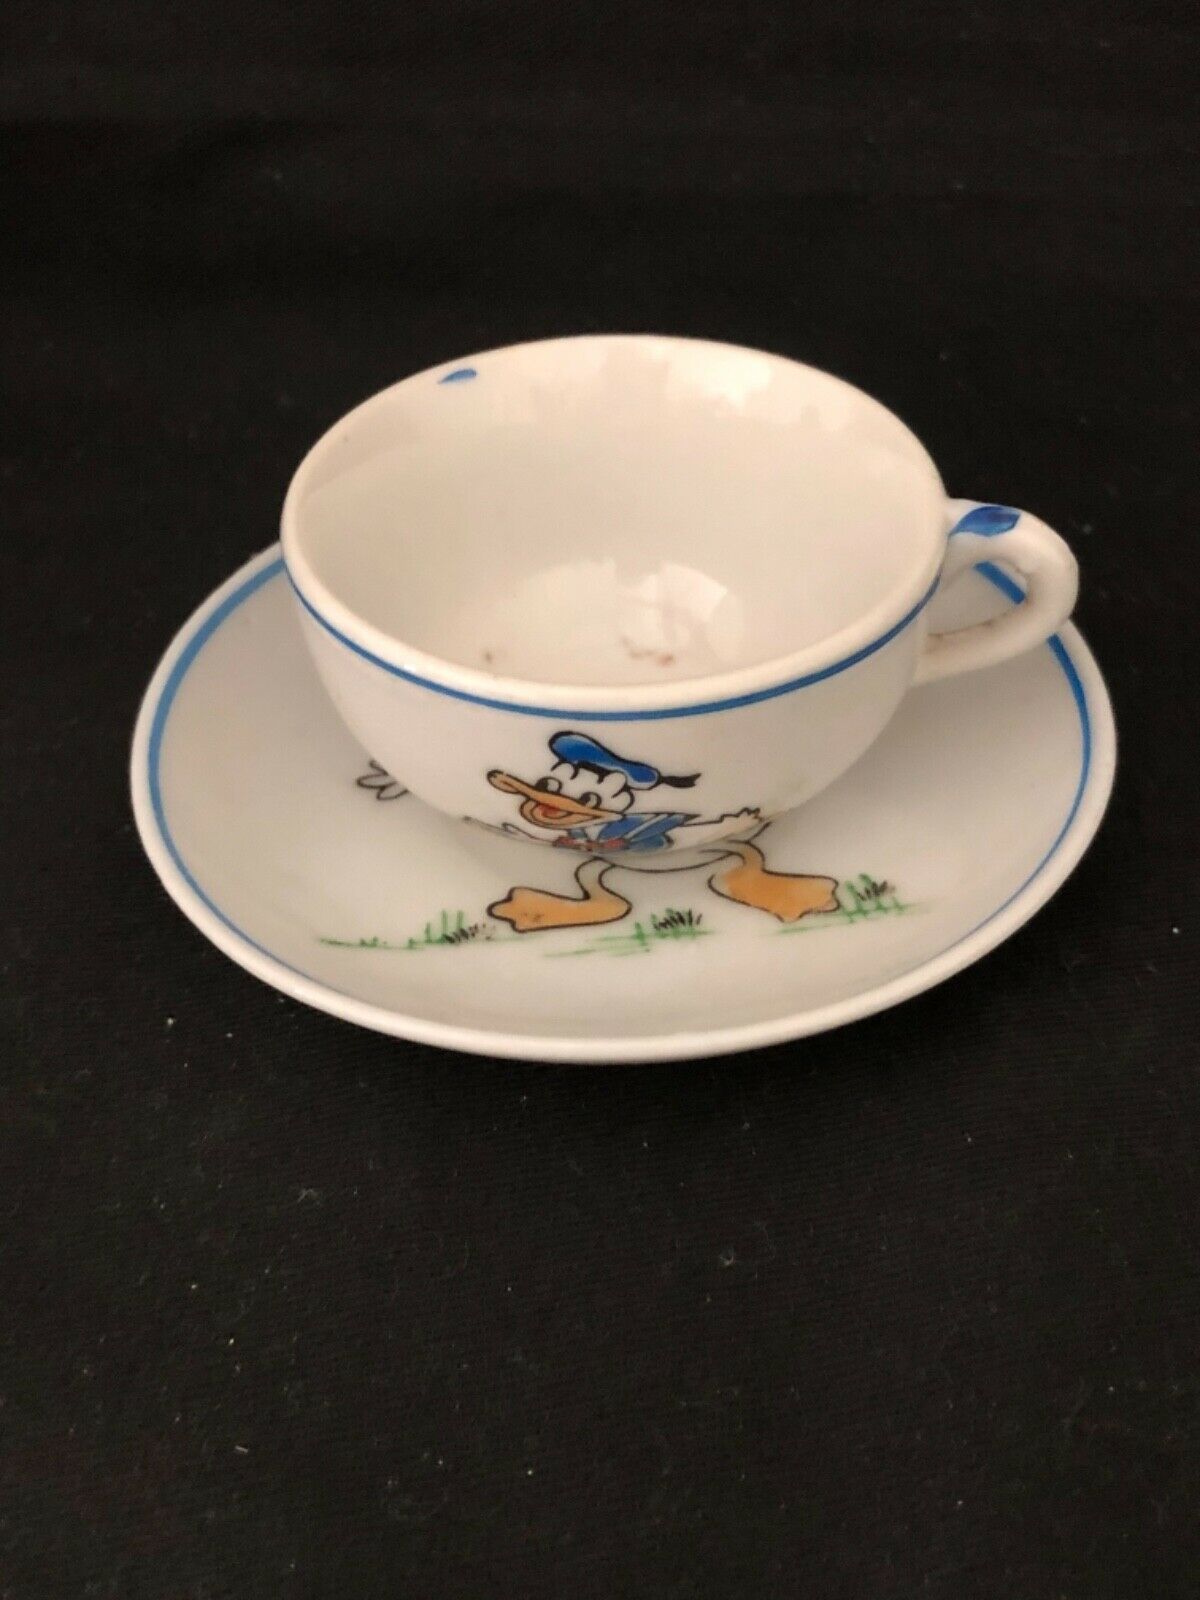 VINTAGE DONALD DUCK CHILDREN’S SMALL CUP AND SAUCER